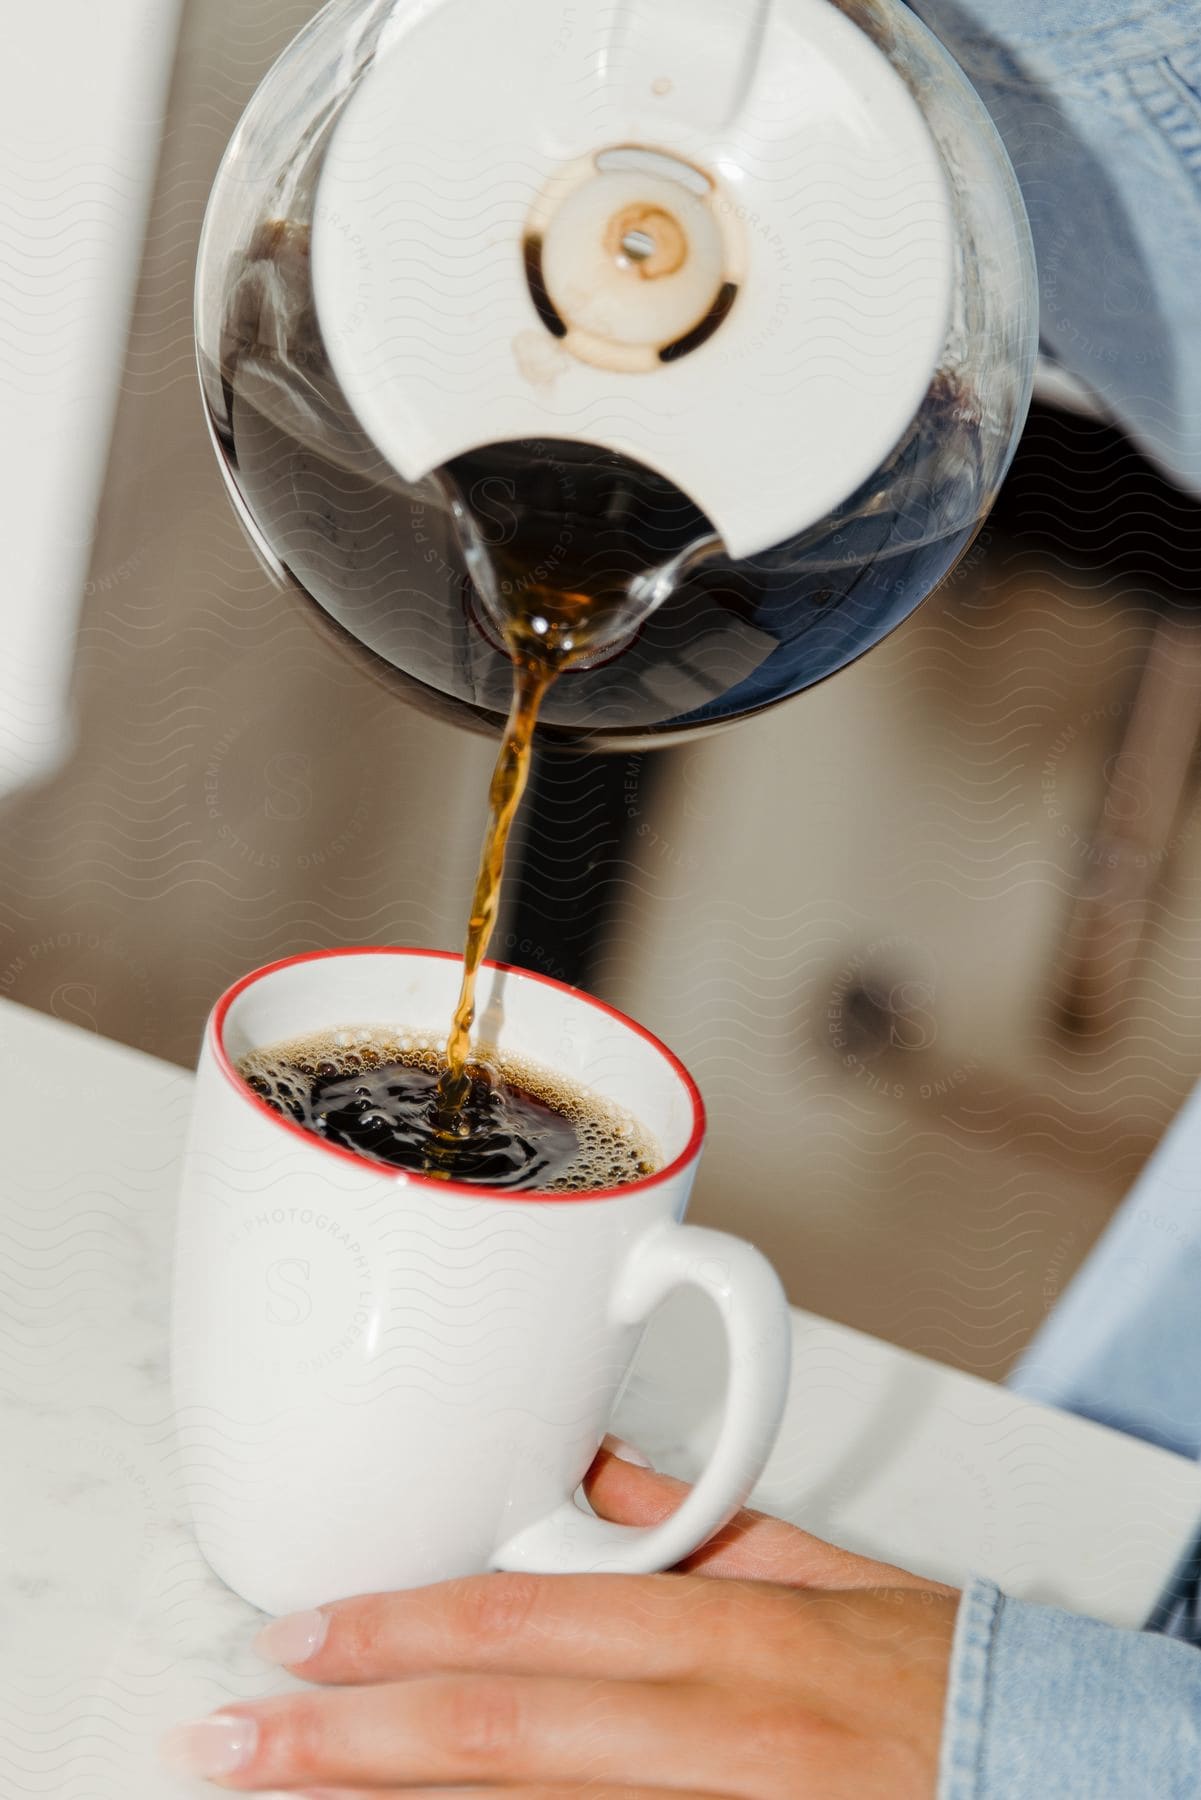 Someone pouring themselves a large cup of coffee.